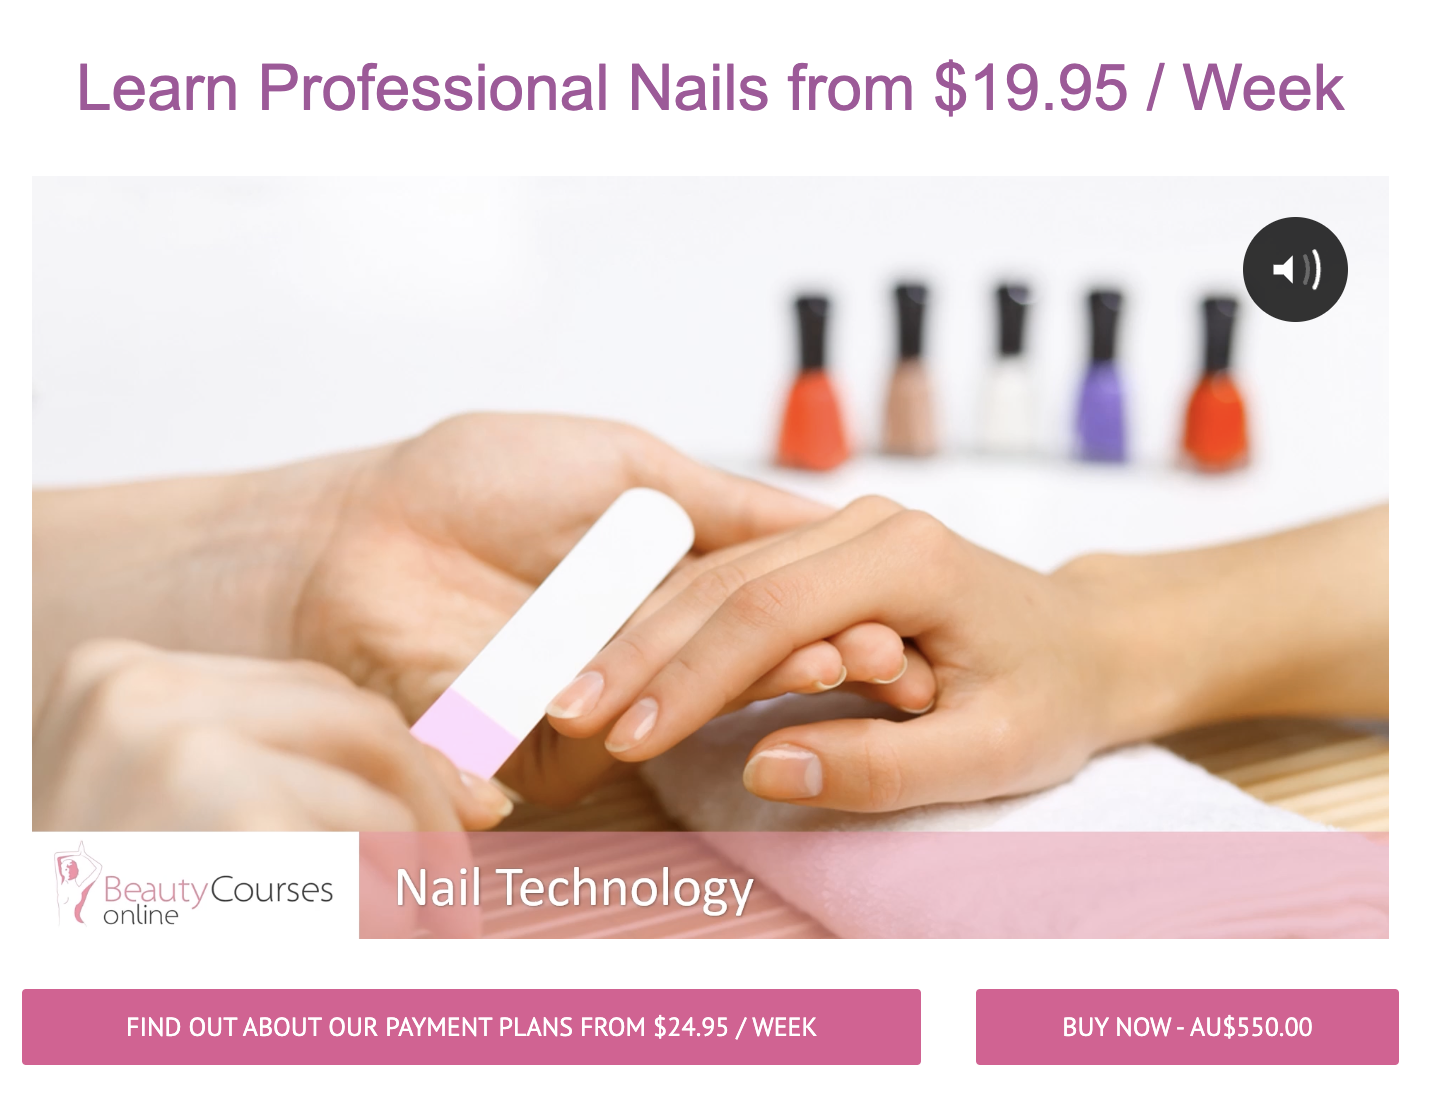 Online Nail Courses Social Media Ad Template | PosterMyWall